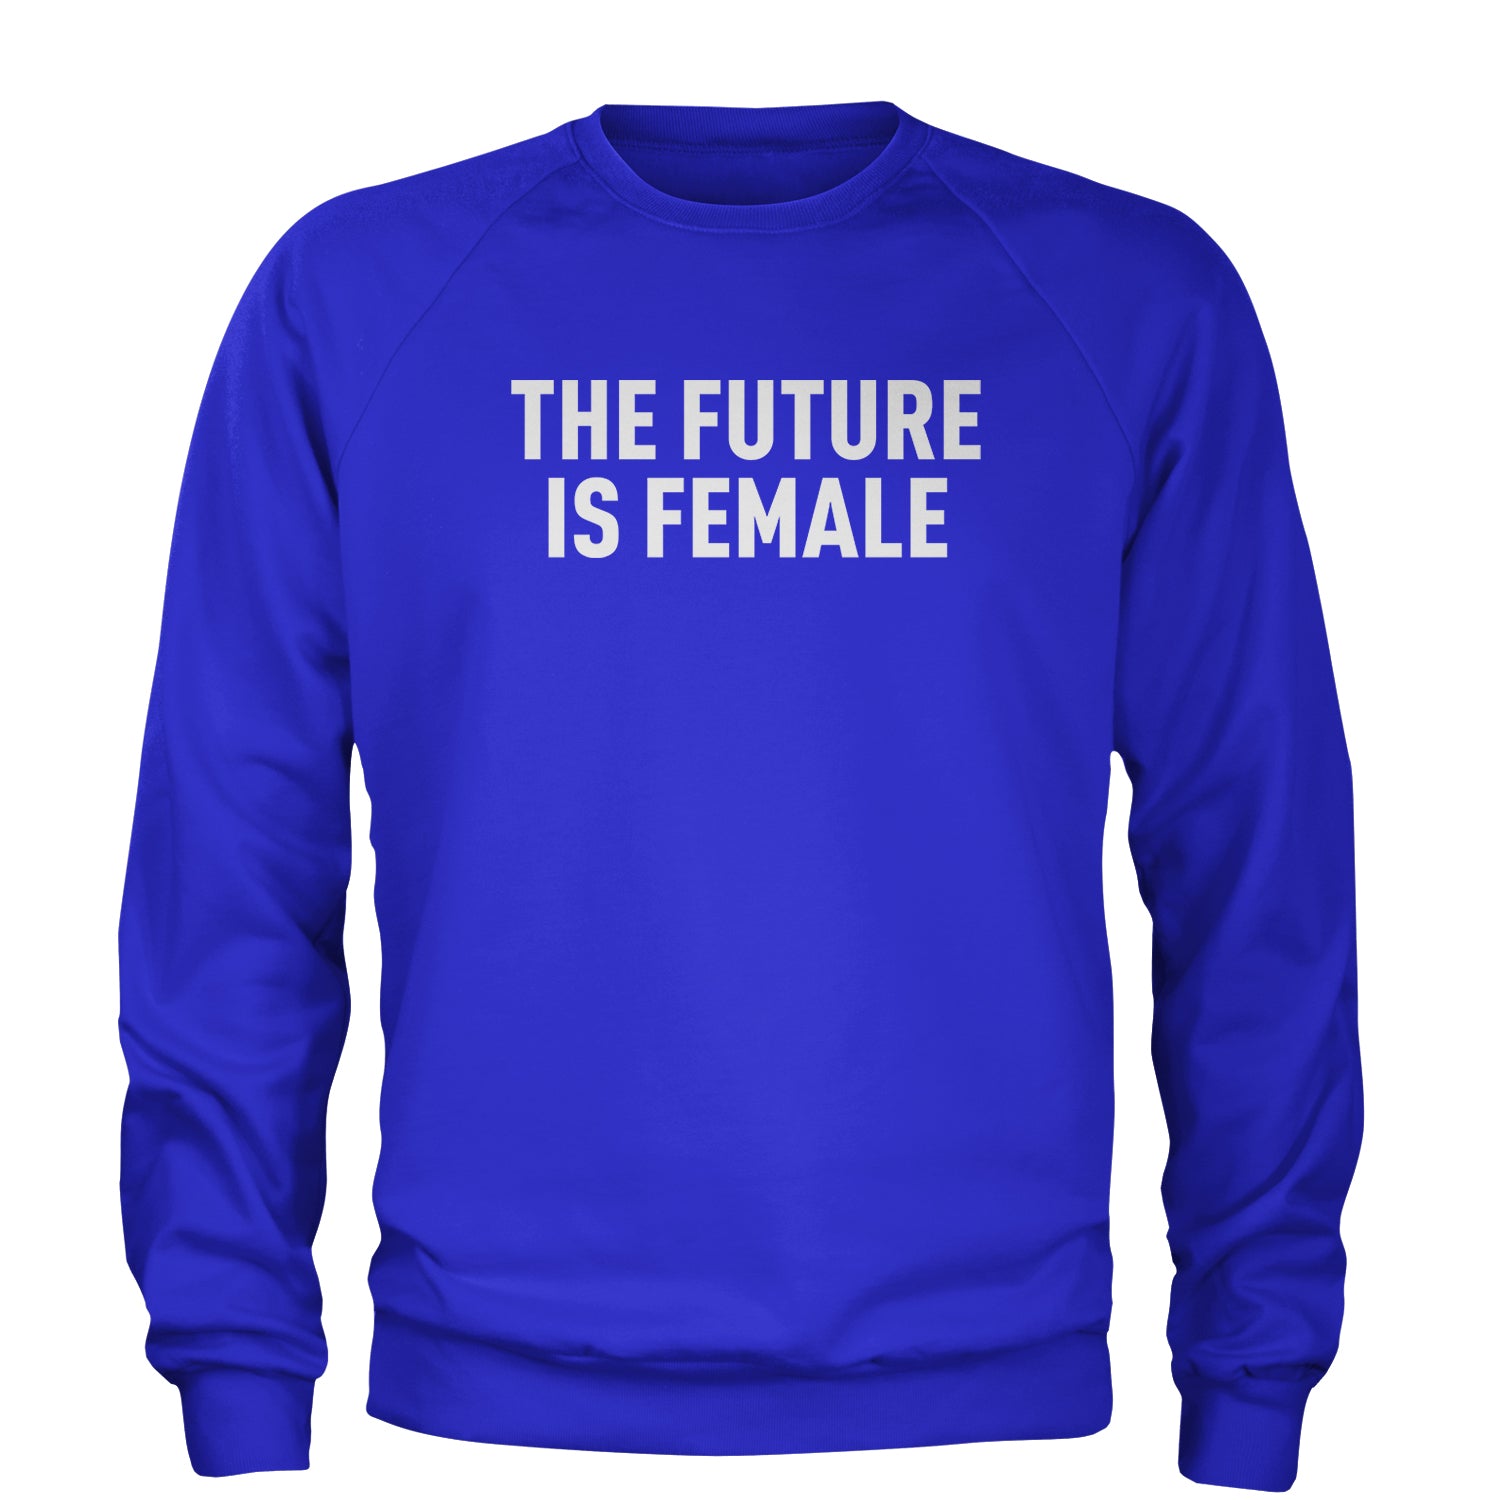 The Future Is Female Feminism Adult Crewneck Sweatshirt female, feminism, feminist, femme, future, is, liberation, suffrage, the by Expression Tees